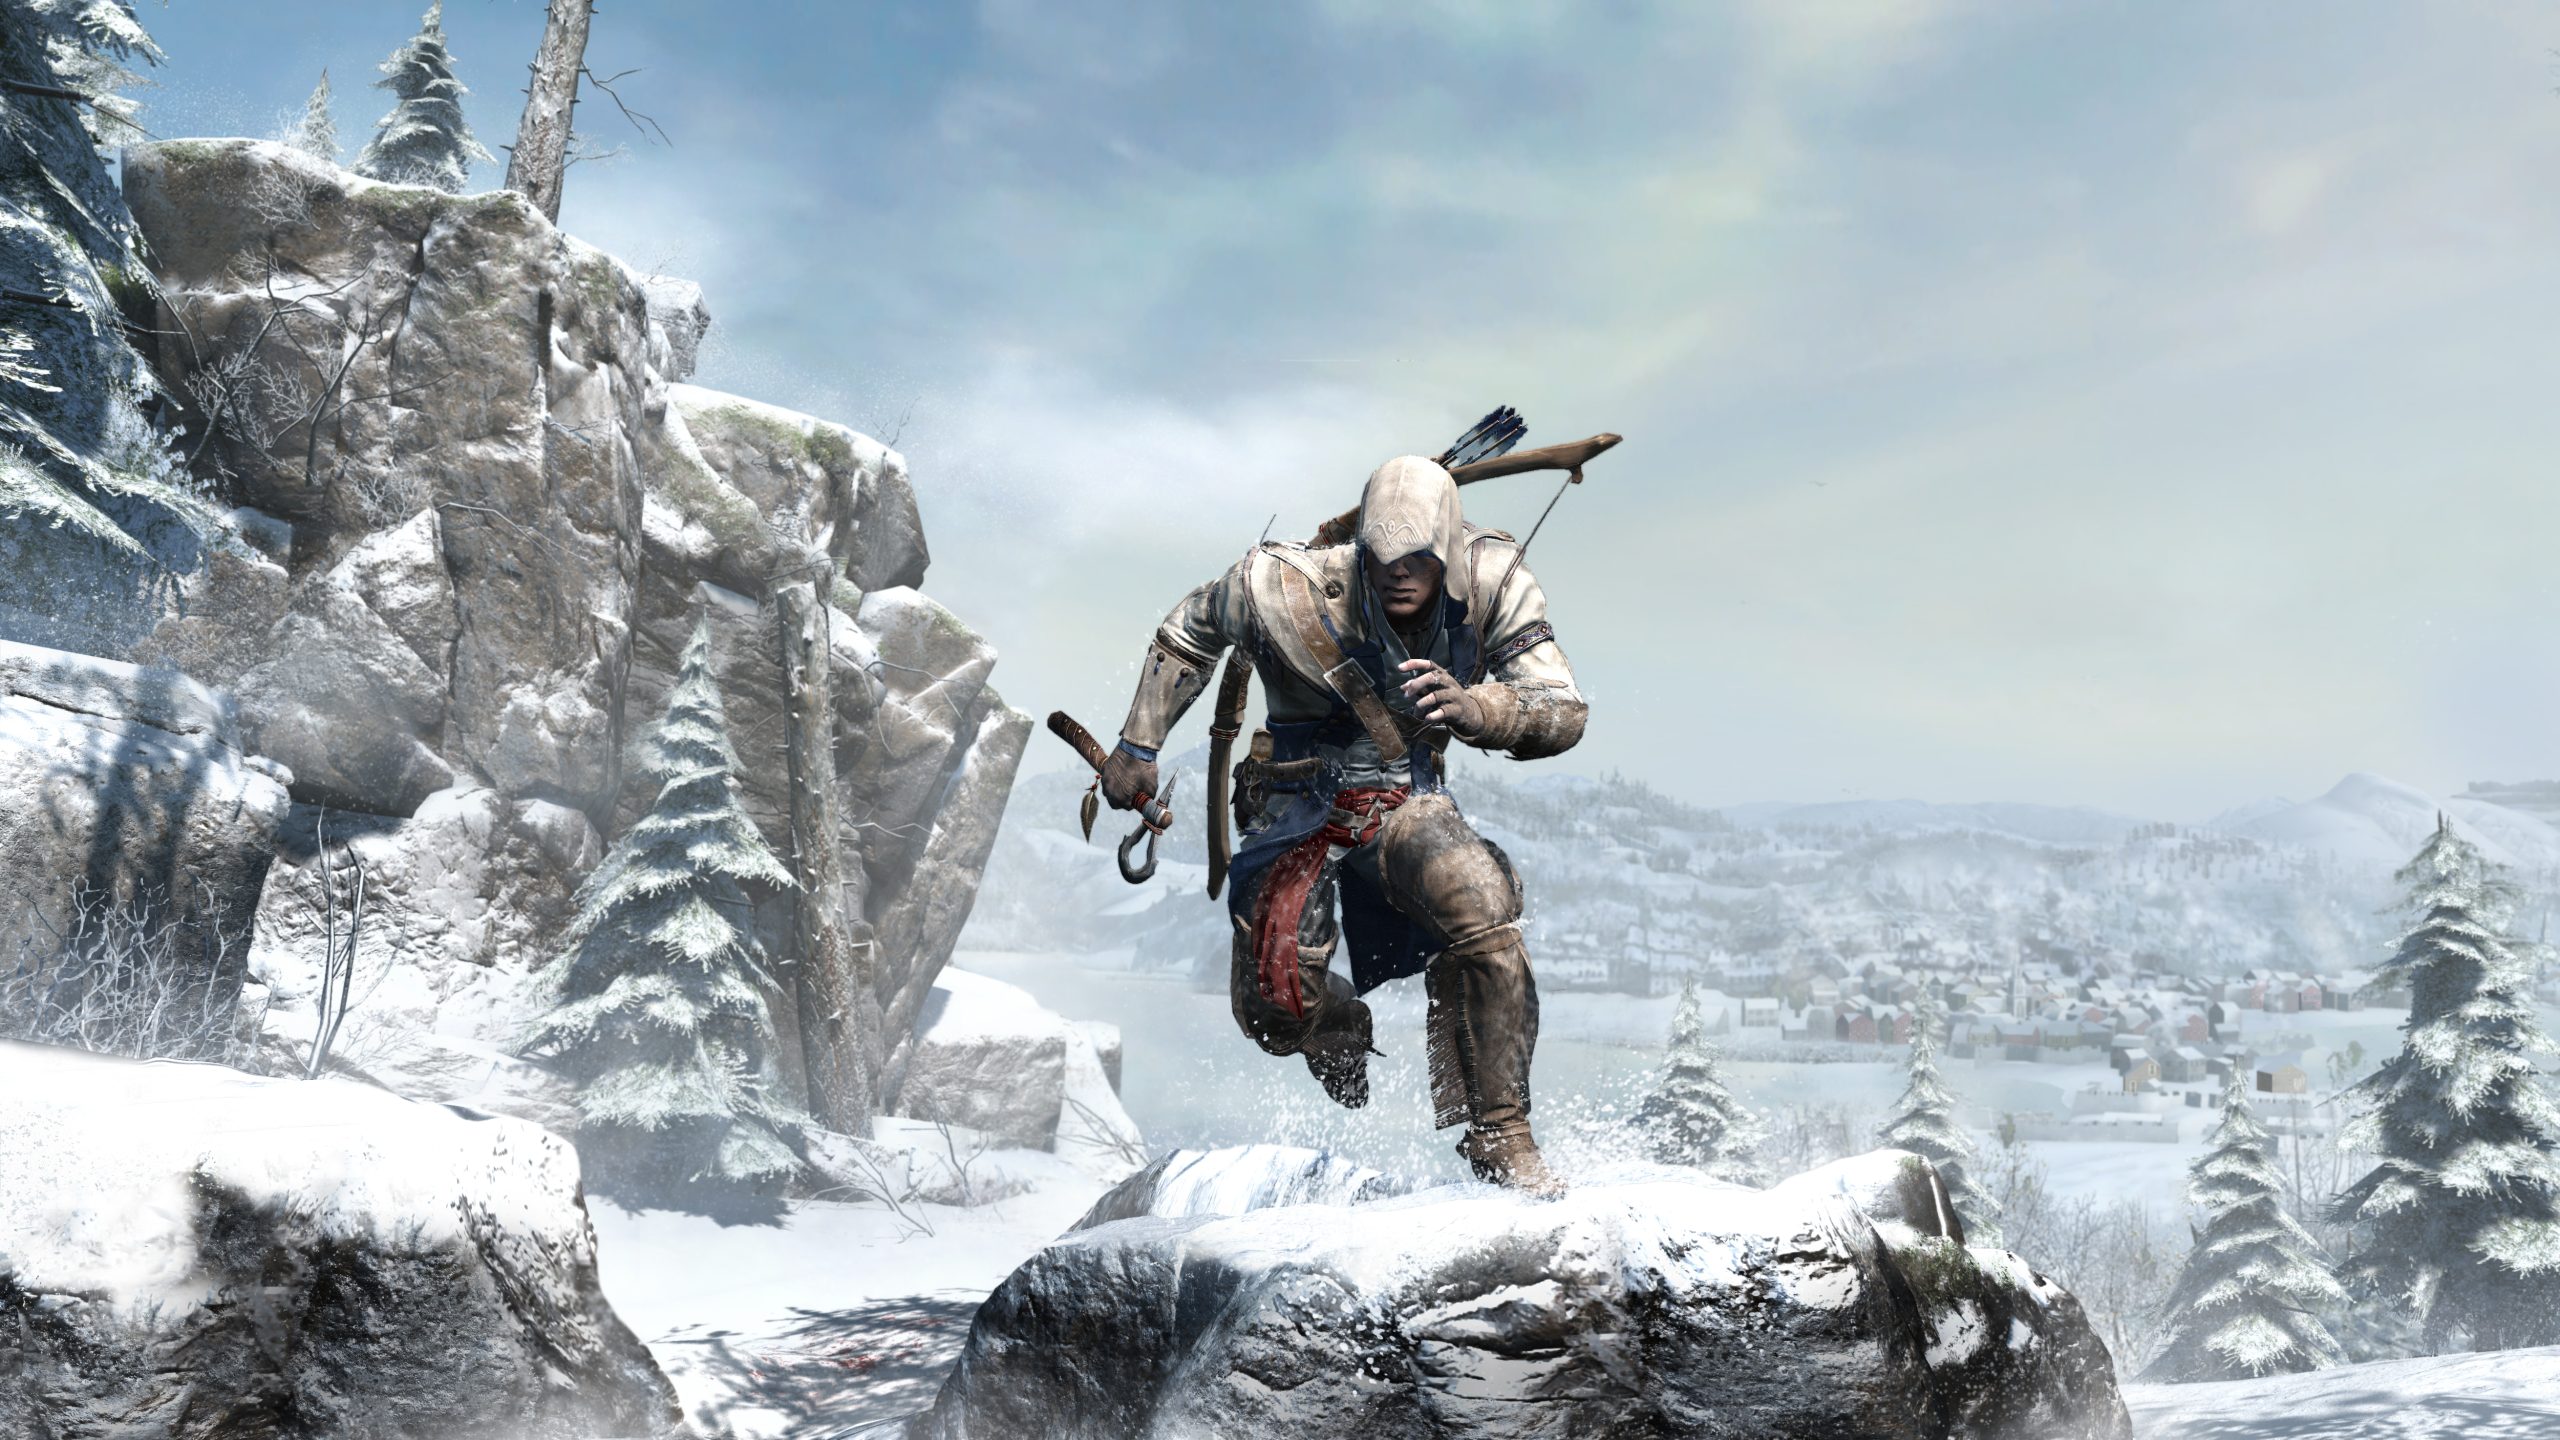 PAX East: Assassin’s Creed 3 is set to please fans of freedom